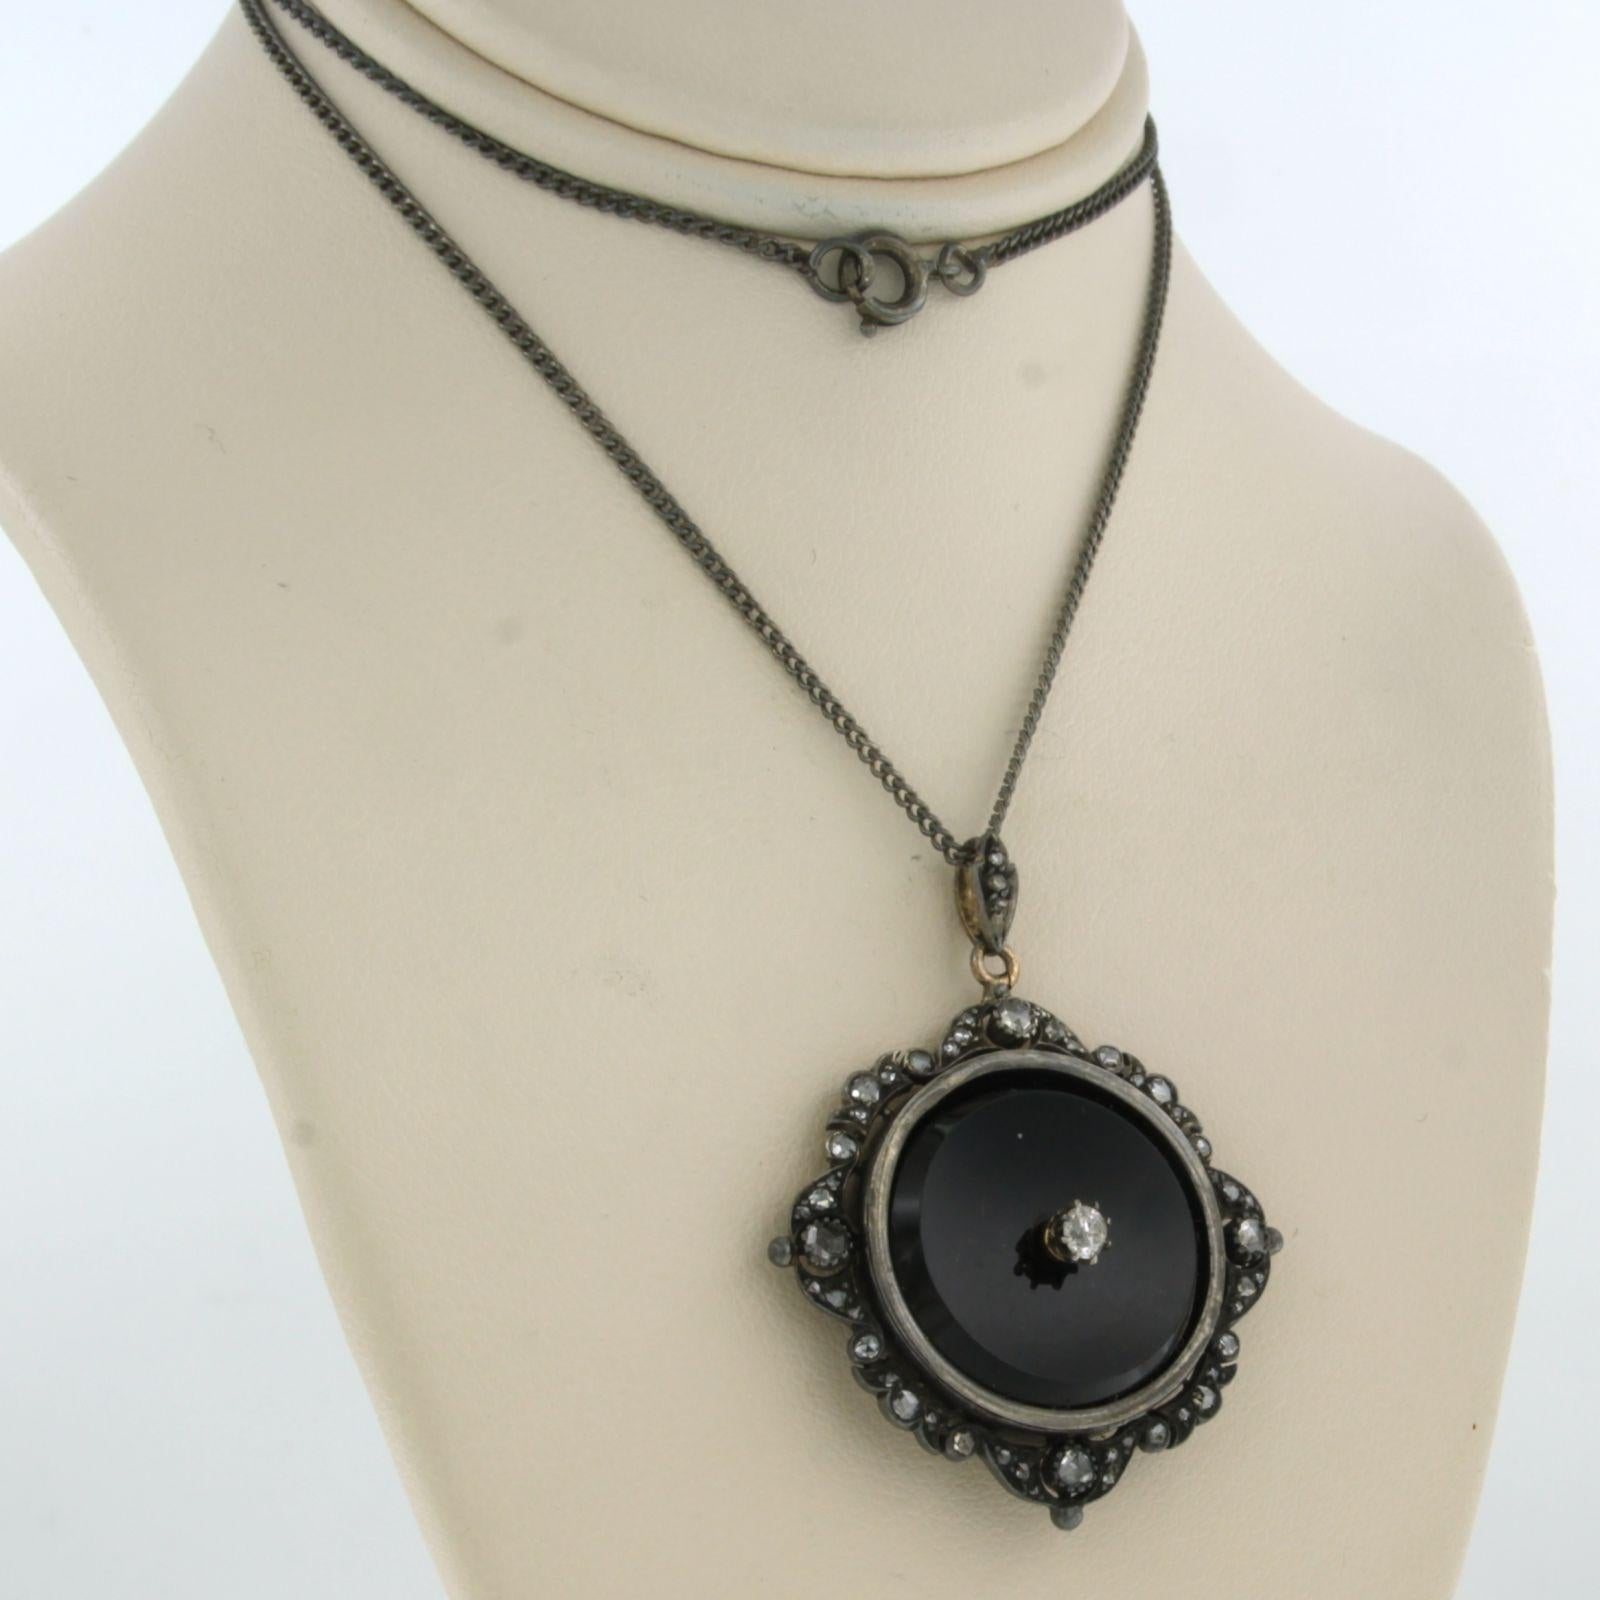 Silver necklace and pendant set with onyx, old mine cut and rose cut diamond. 0.25ct - 40cm long

detailed description:

the length of the necklace is 40 cm long by 1.4 mm wide

size of the pendant is 3.8 cm by 3.1 cm wide

weight 9.4